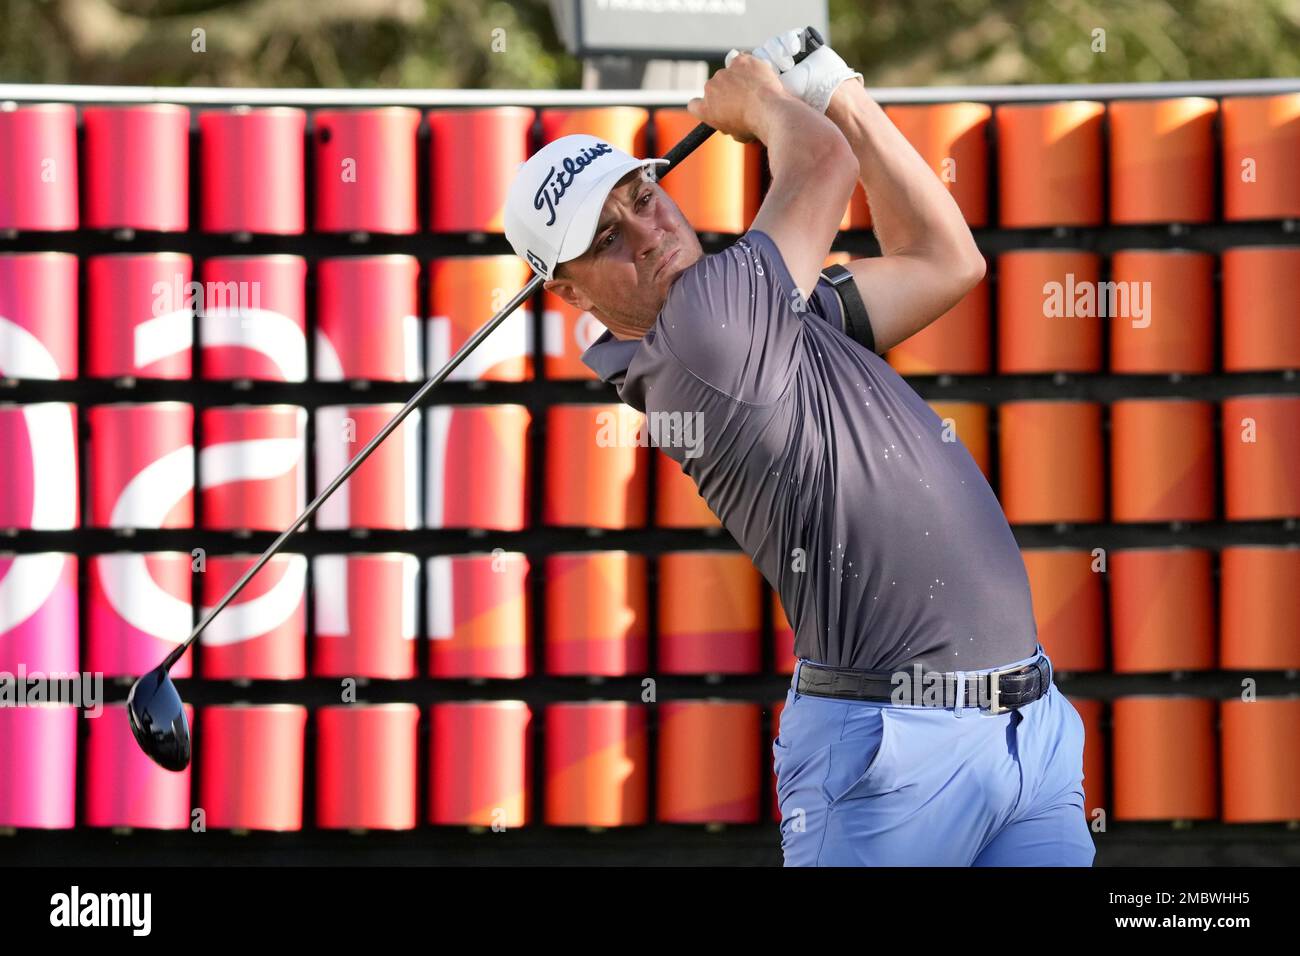 Justin Thomas tees off on the 18th hole during the final round of the Valspar Championship golf tournament Sunday, March 20, 2022, at Innisbrook in Palm Harbor, Fla